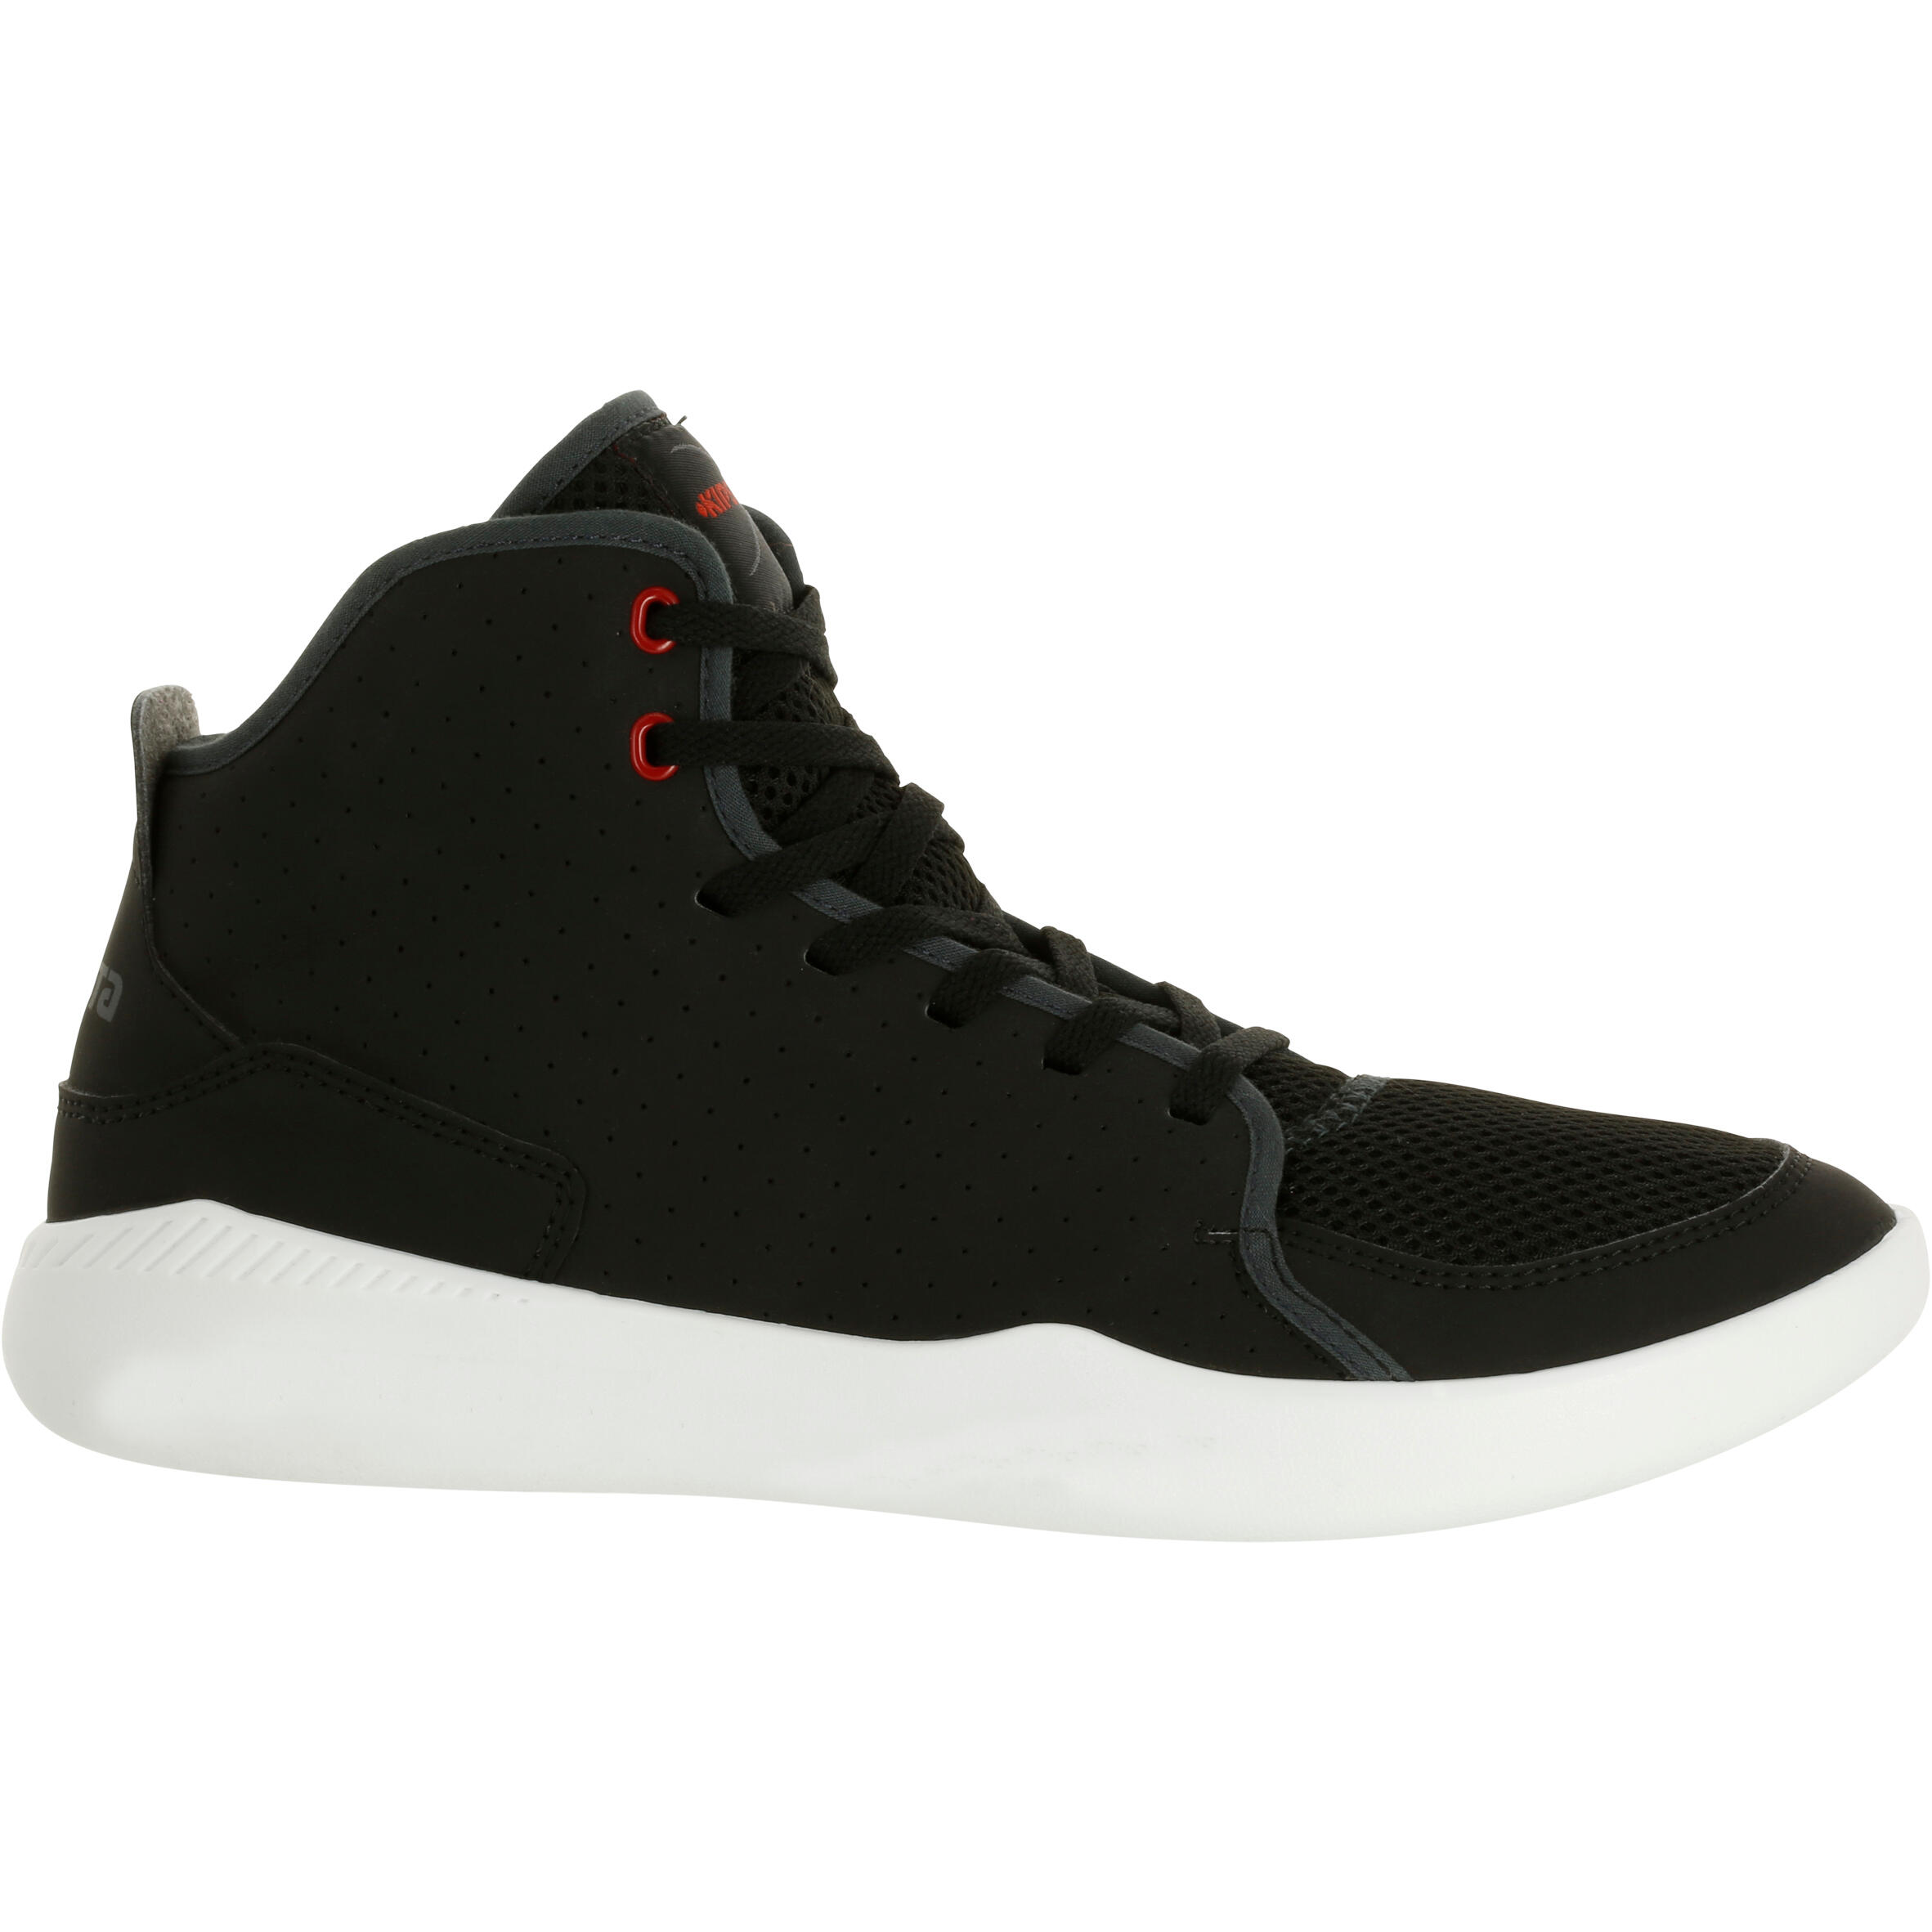 mens basketball shoes under 100